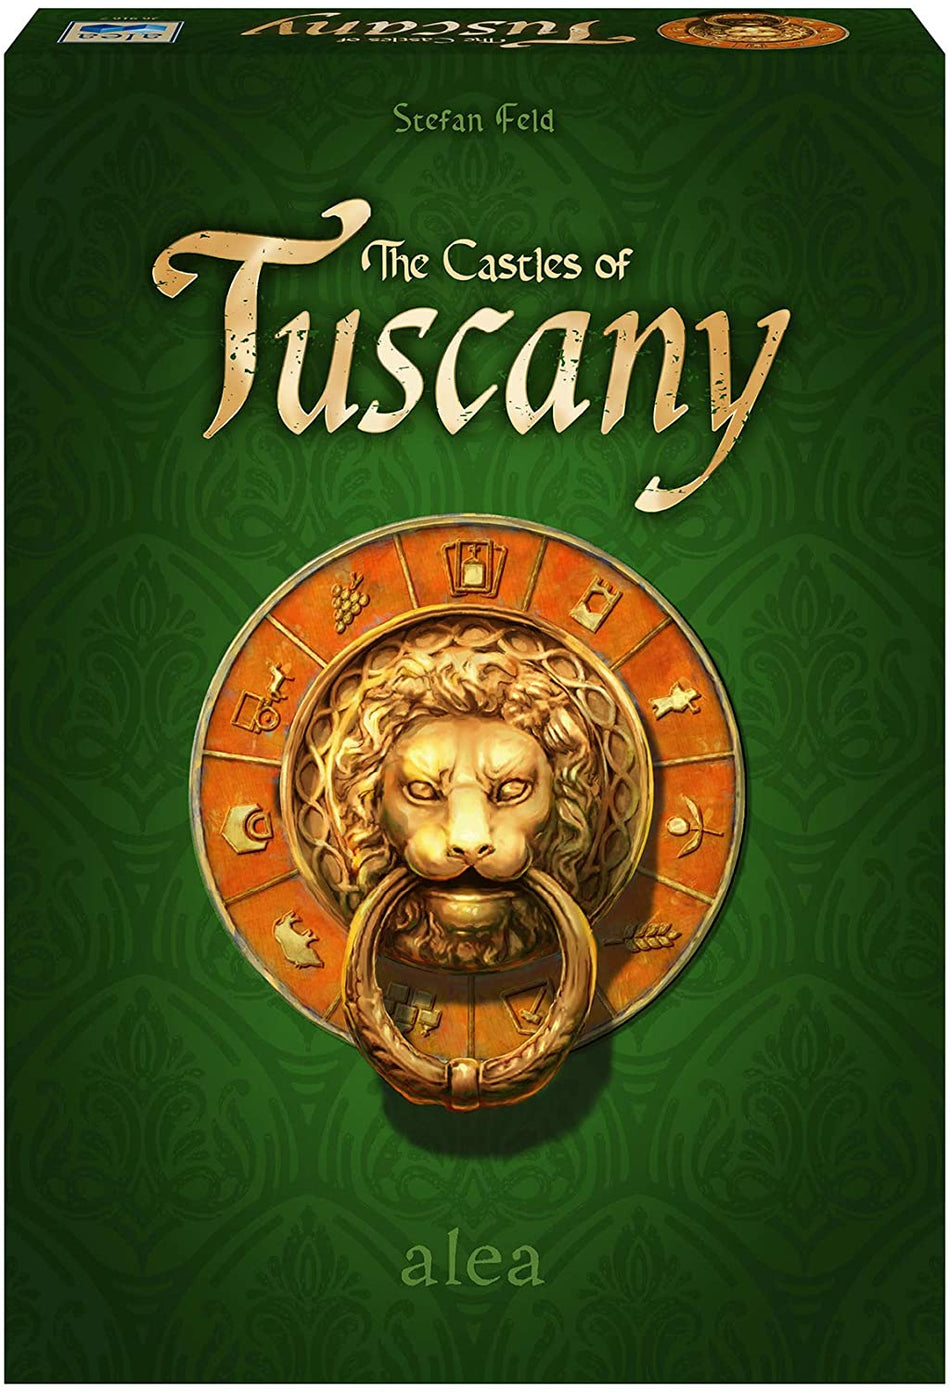 Ravensburger: The Castles of Tuscany